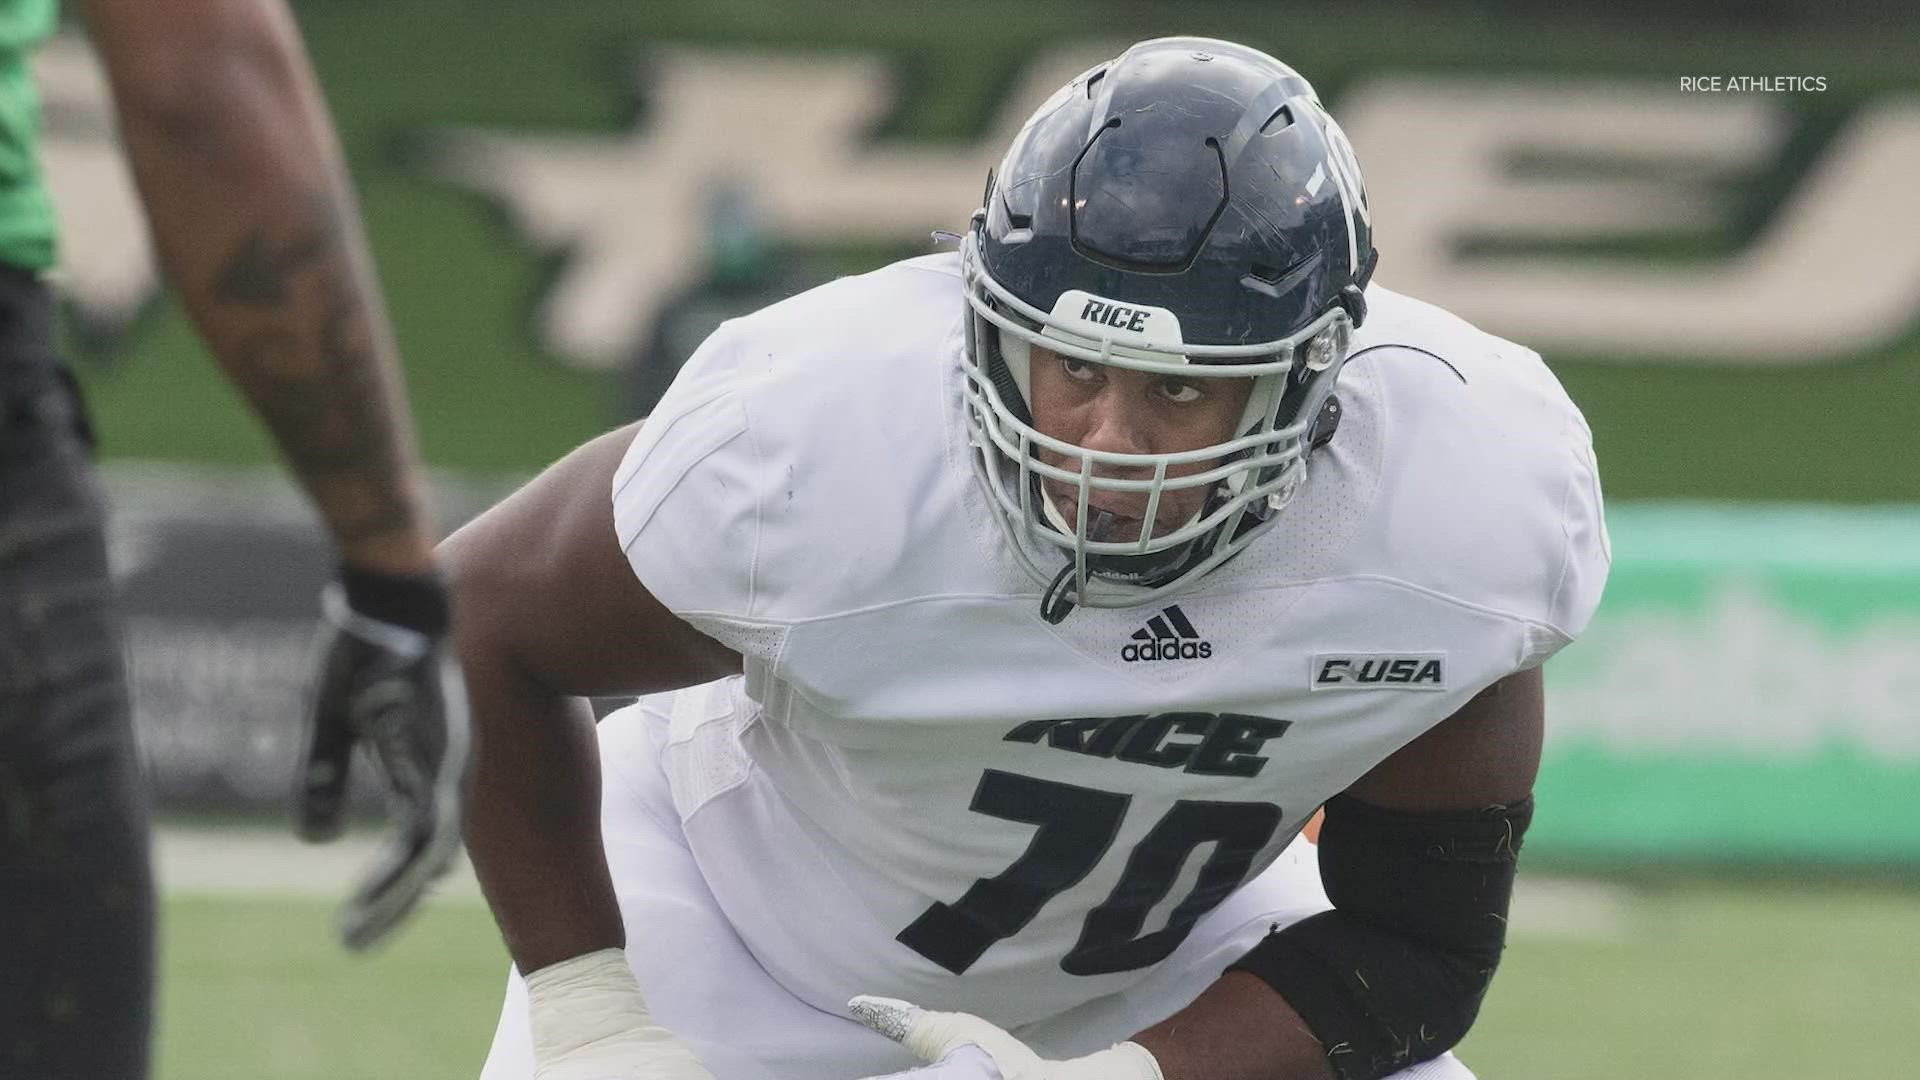 Jovaun Woolford is a 25-year-old football player and enrolled in Rice’s Masters of Global Affairs program. He says his age is an honor to him and the team.